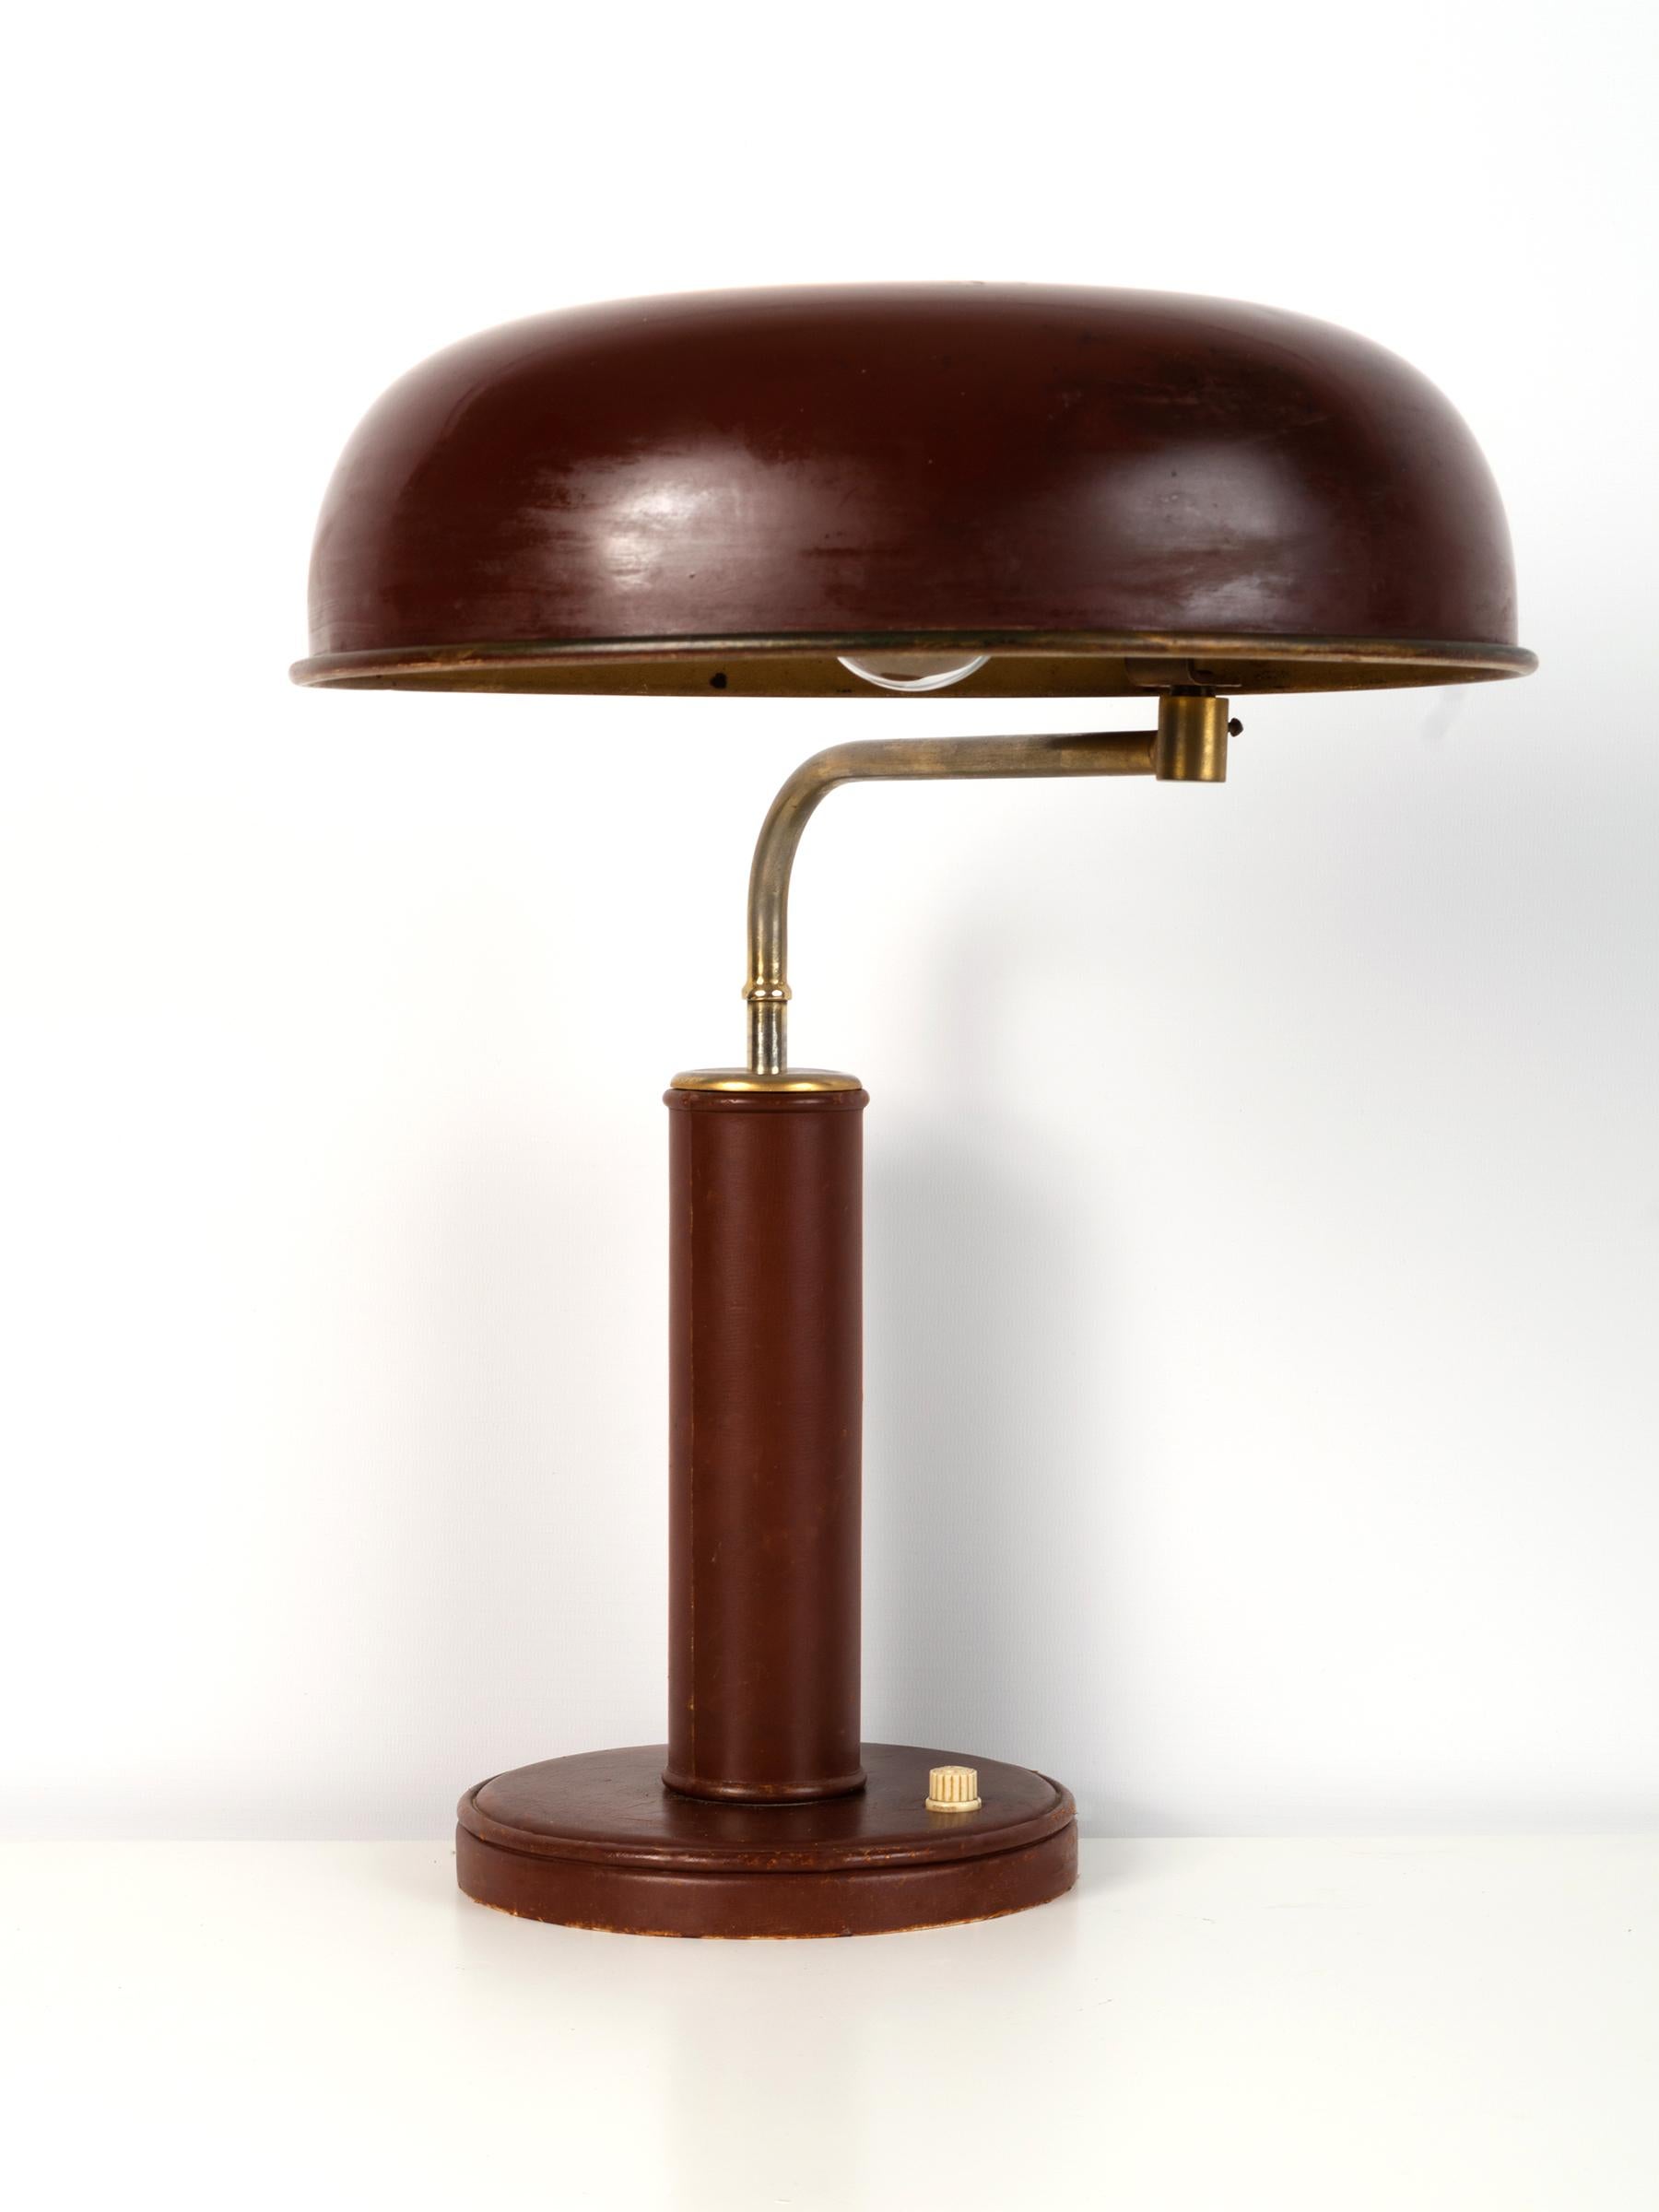 French desk lamp dating from circa 1940. The base is constructed in leather with a brass stem and shade.

Presented in very good condition commensurate of age and use.